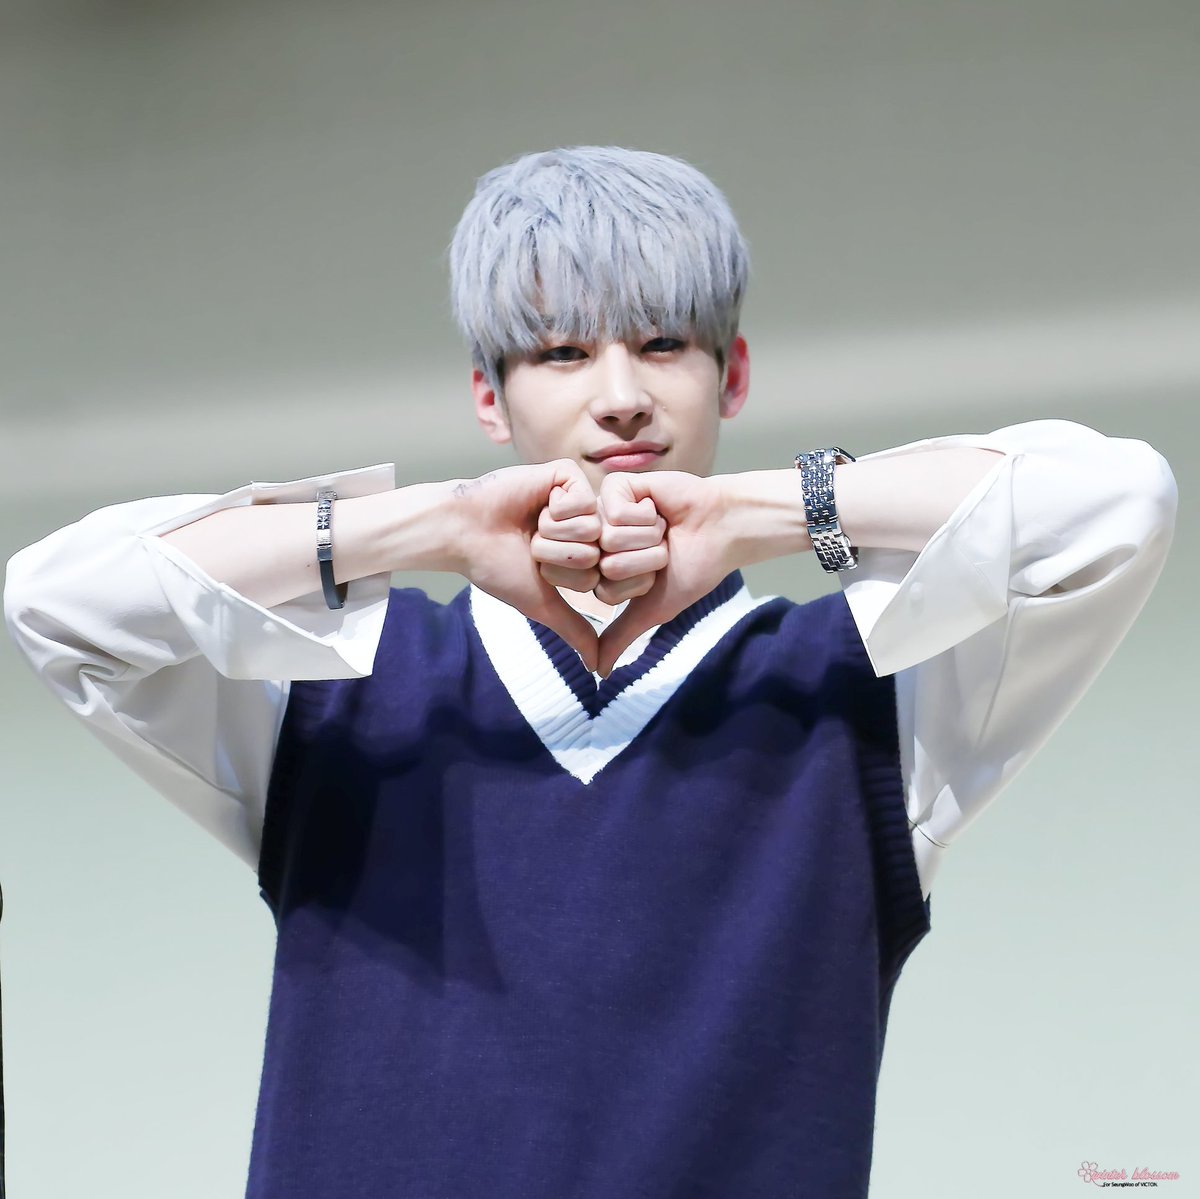 15. seungwoo handsome, ending this thread (not really) with seungwoo silver/blond hair